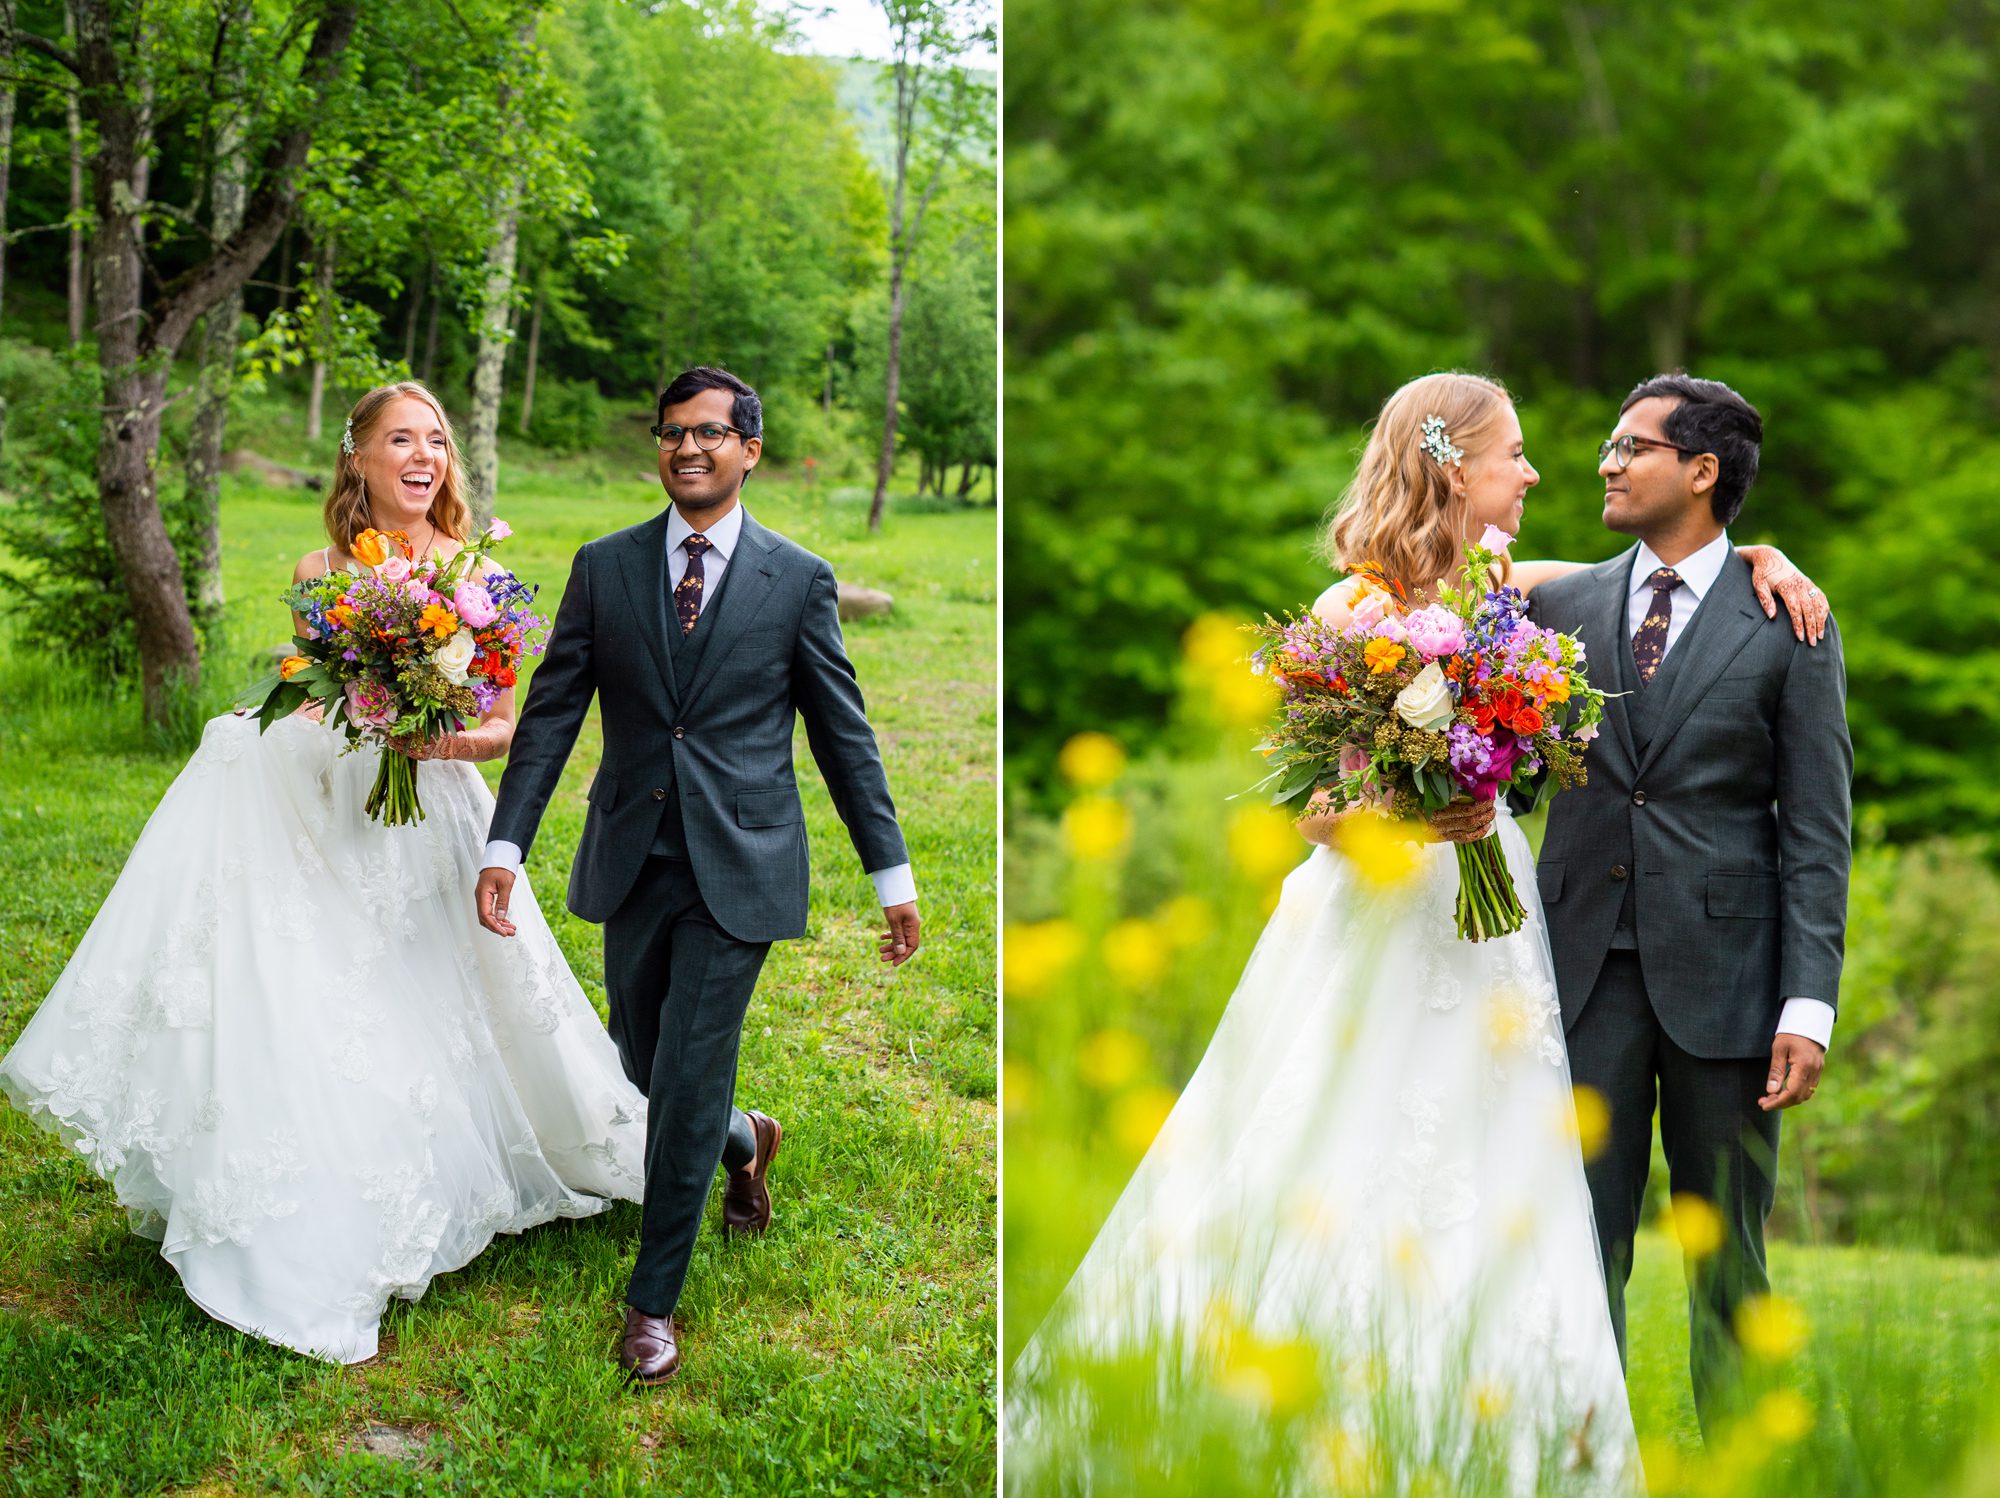 Bride and Groom at Full Moon Resort with Colorful Bouquet